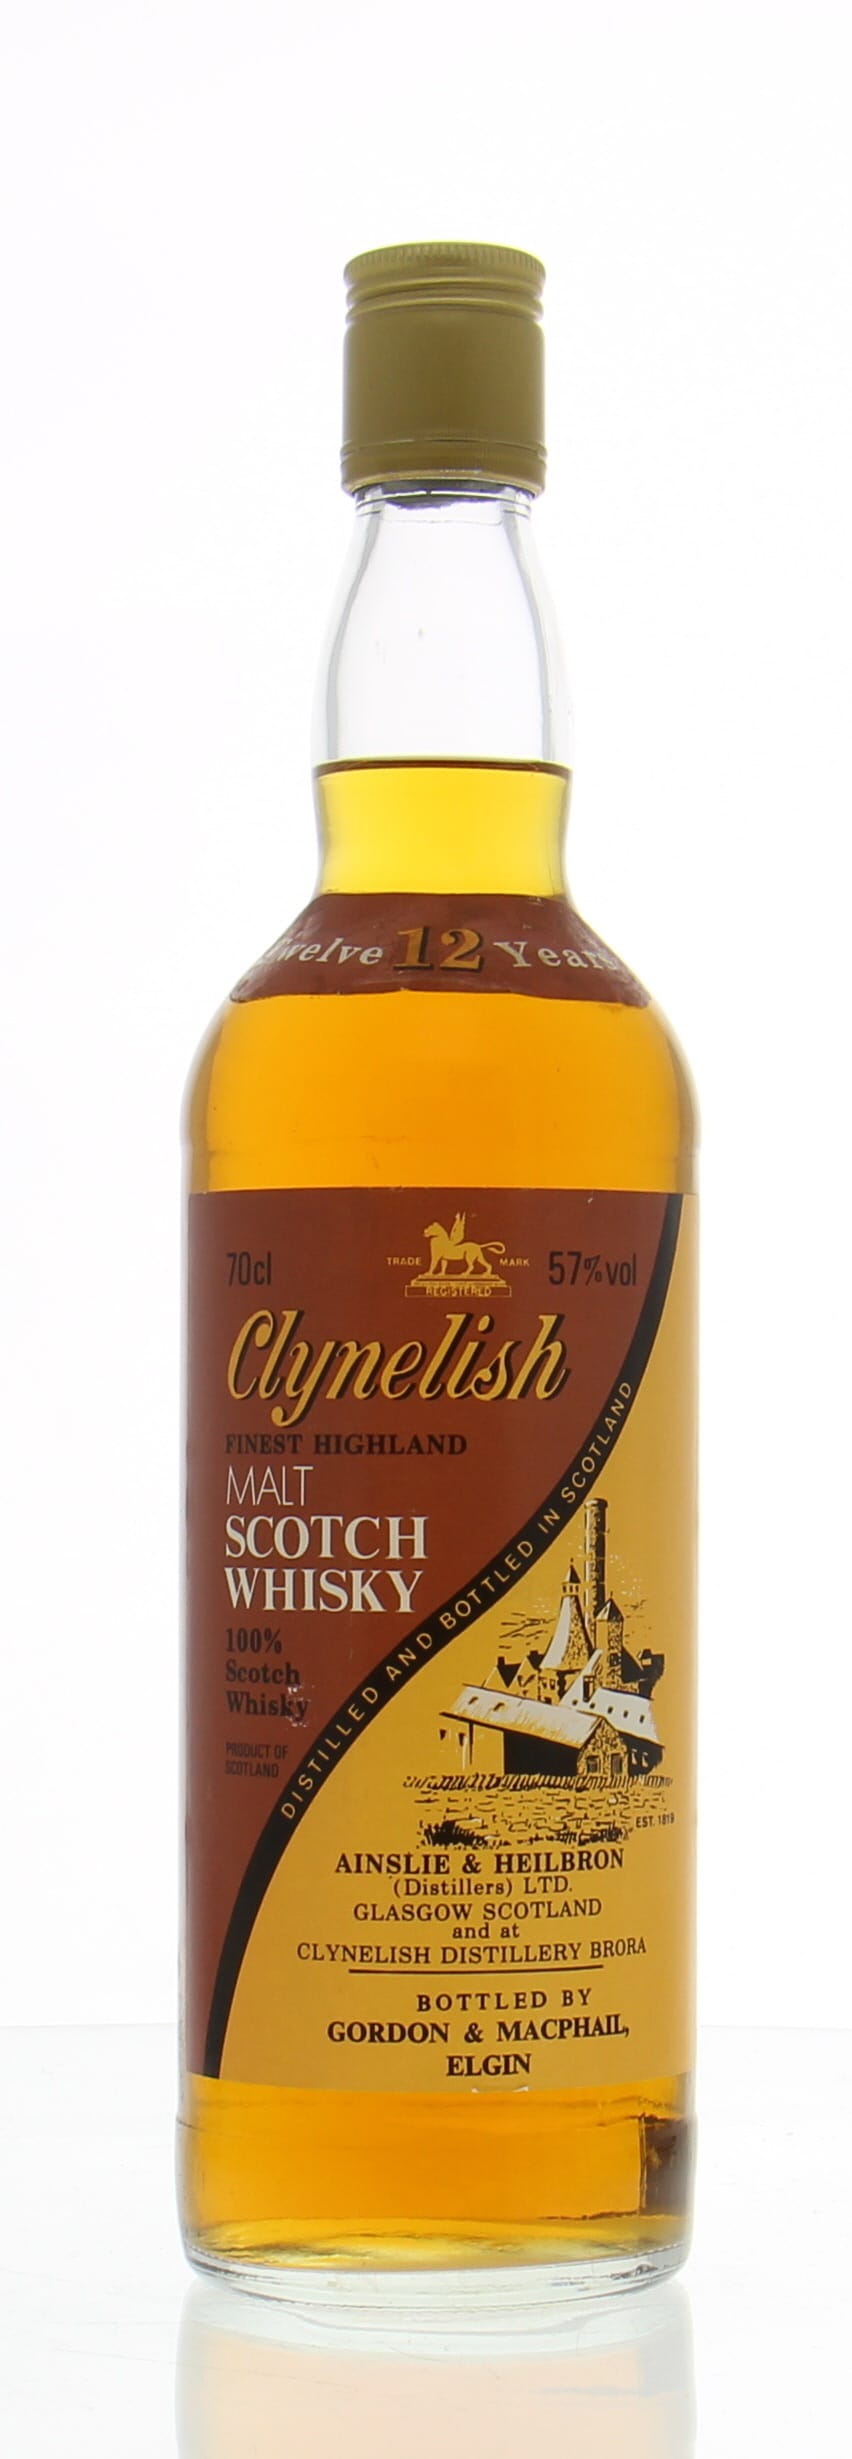 Clynelish - 12 Years Old Ainslie & Heilbron 57% NV Perfect